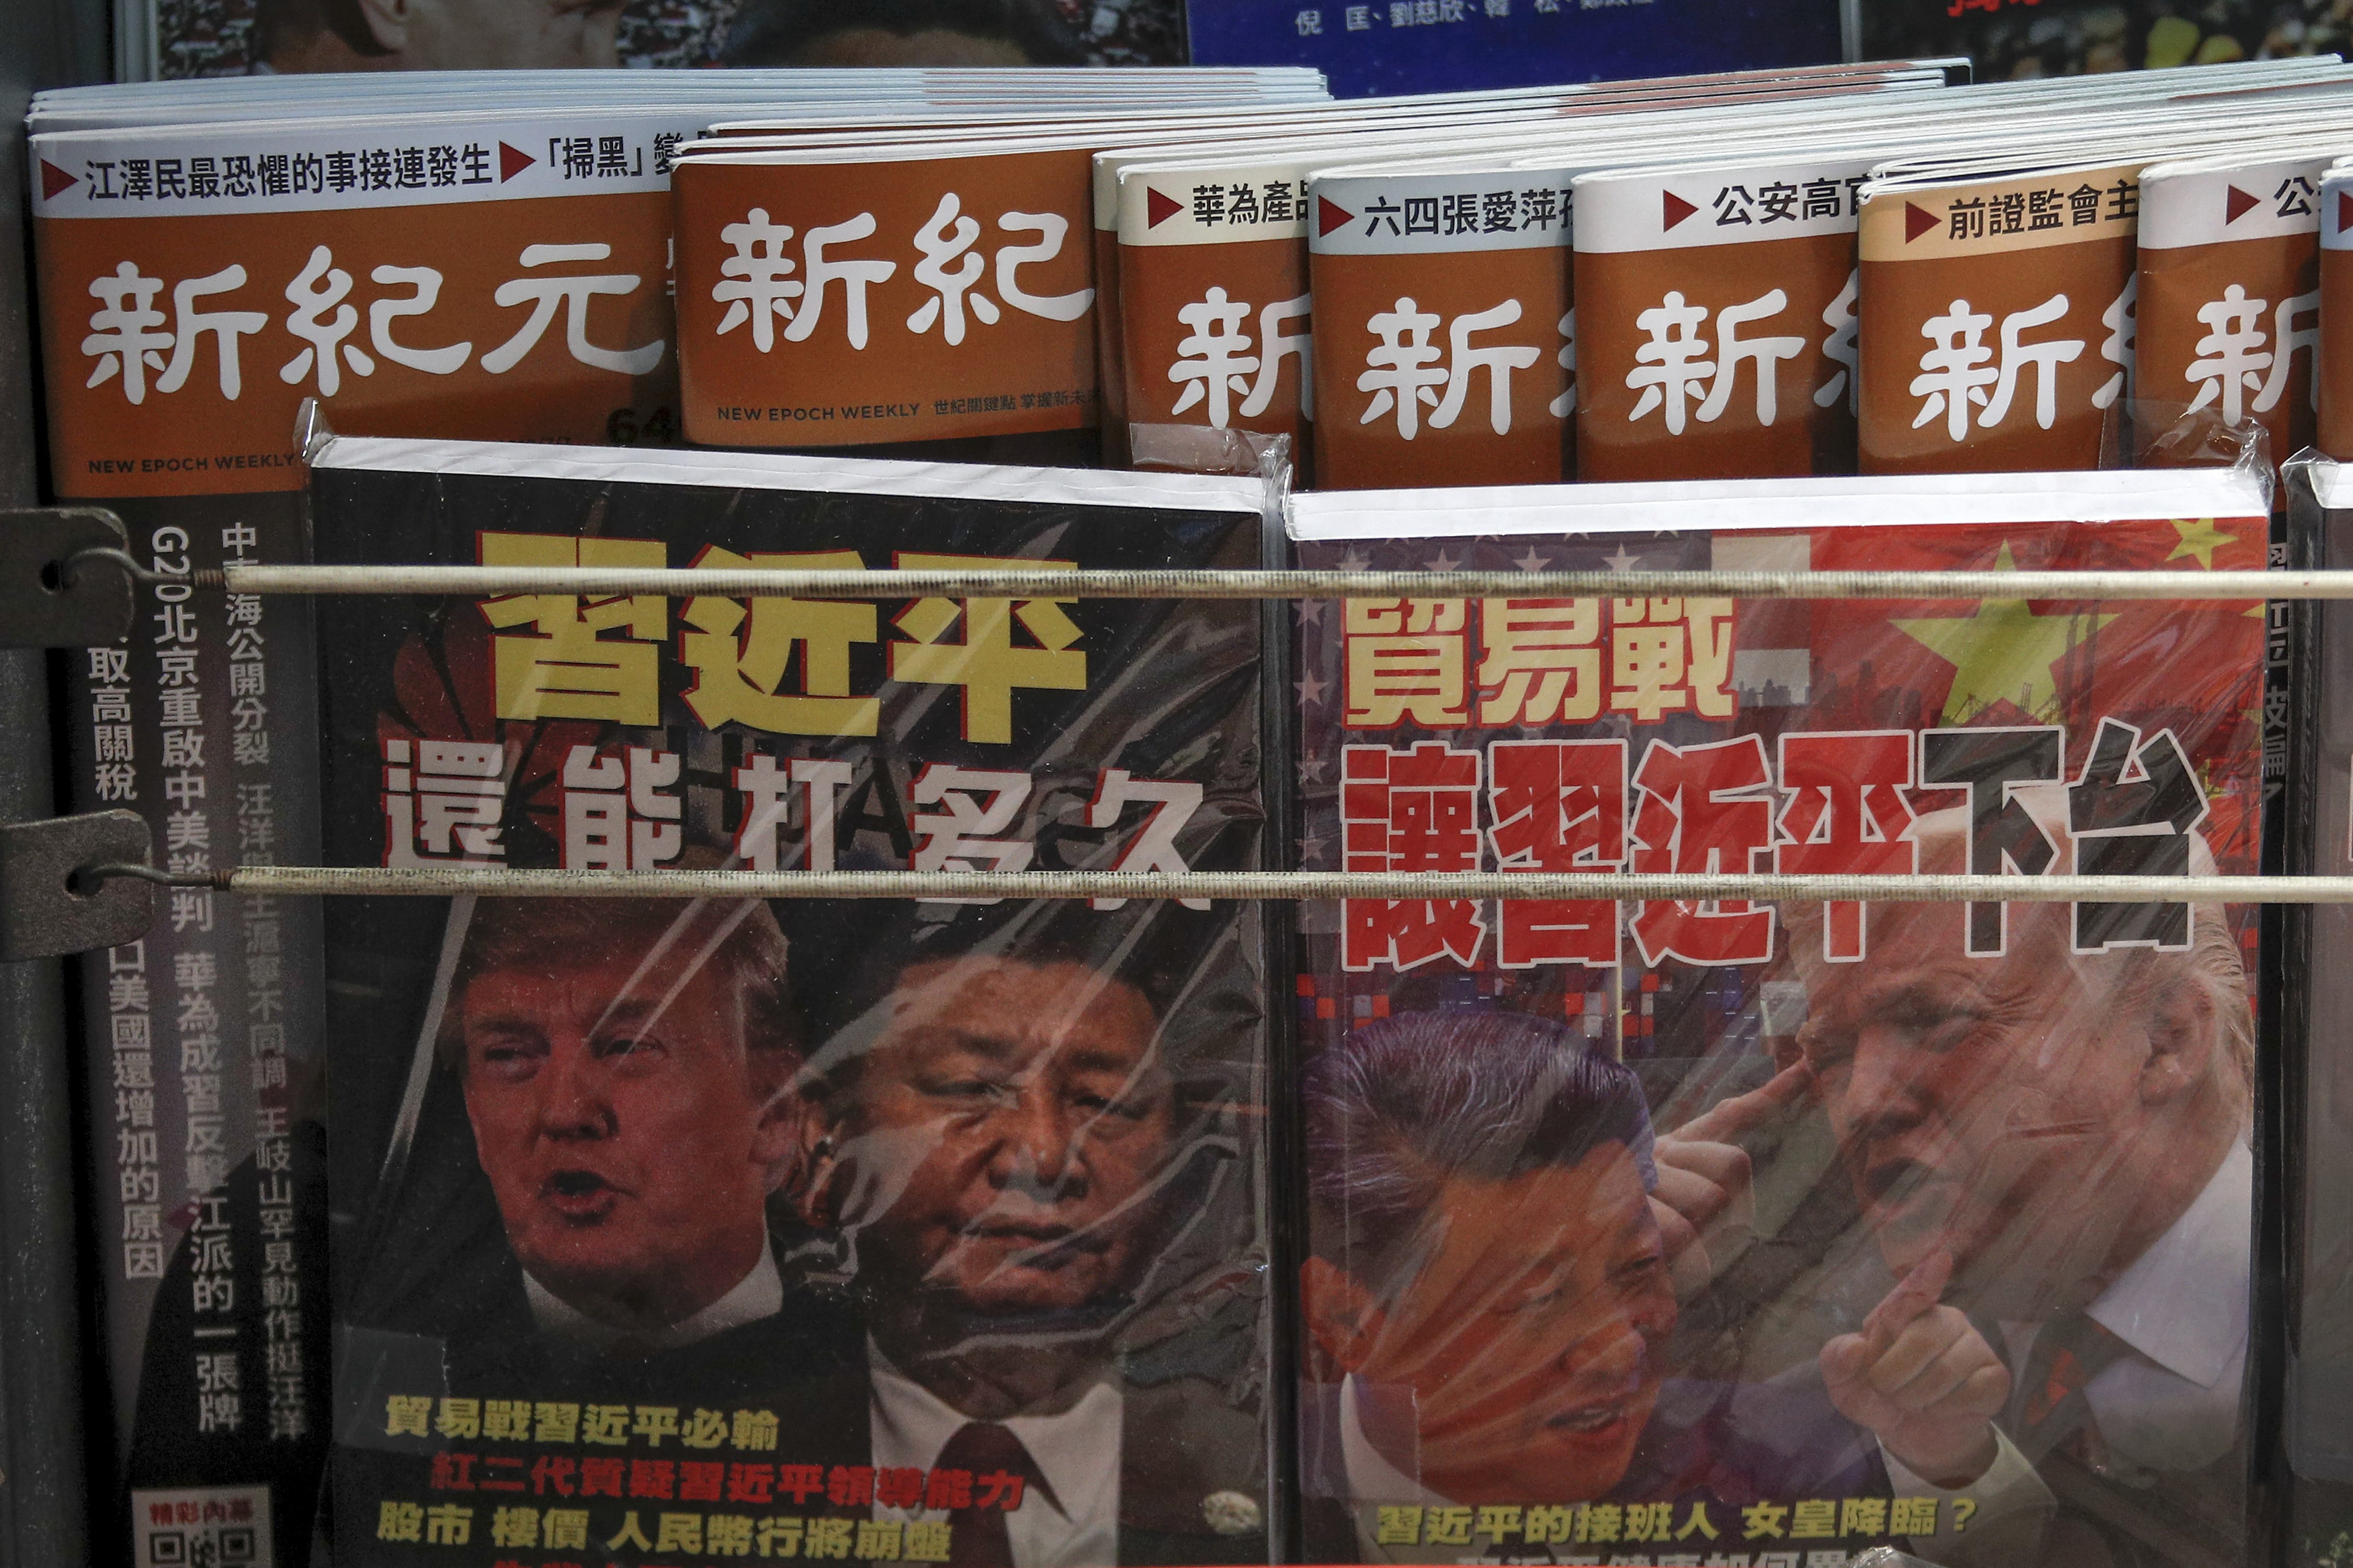 In this July 4, 2019, photo, Chinese magazines with front covers featuring Chinese President Xi Jinping and U.S. President Donald Trump on trade war is placed on sale at a roadside bookstand in Hong Kong. Facing another U.S. tariff hike, Xi is getting tougher with Washington instead of backing down. Both sides have incentives to settle a trade war that is battering exporters on either side of the Pacific and threatening to tip the global economy into recession.